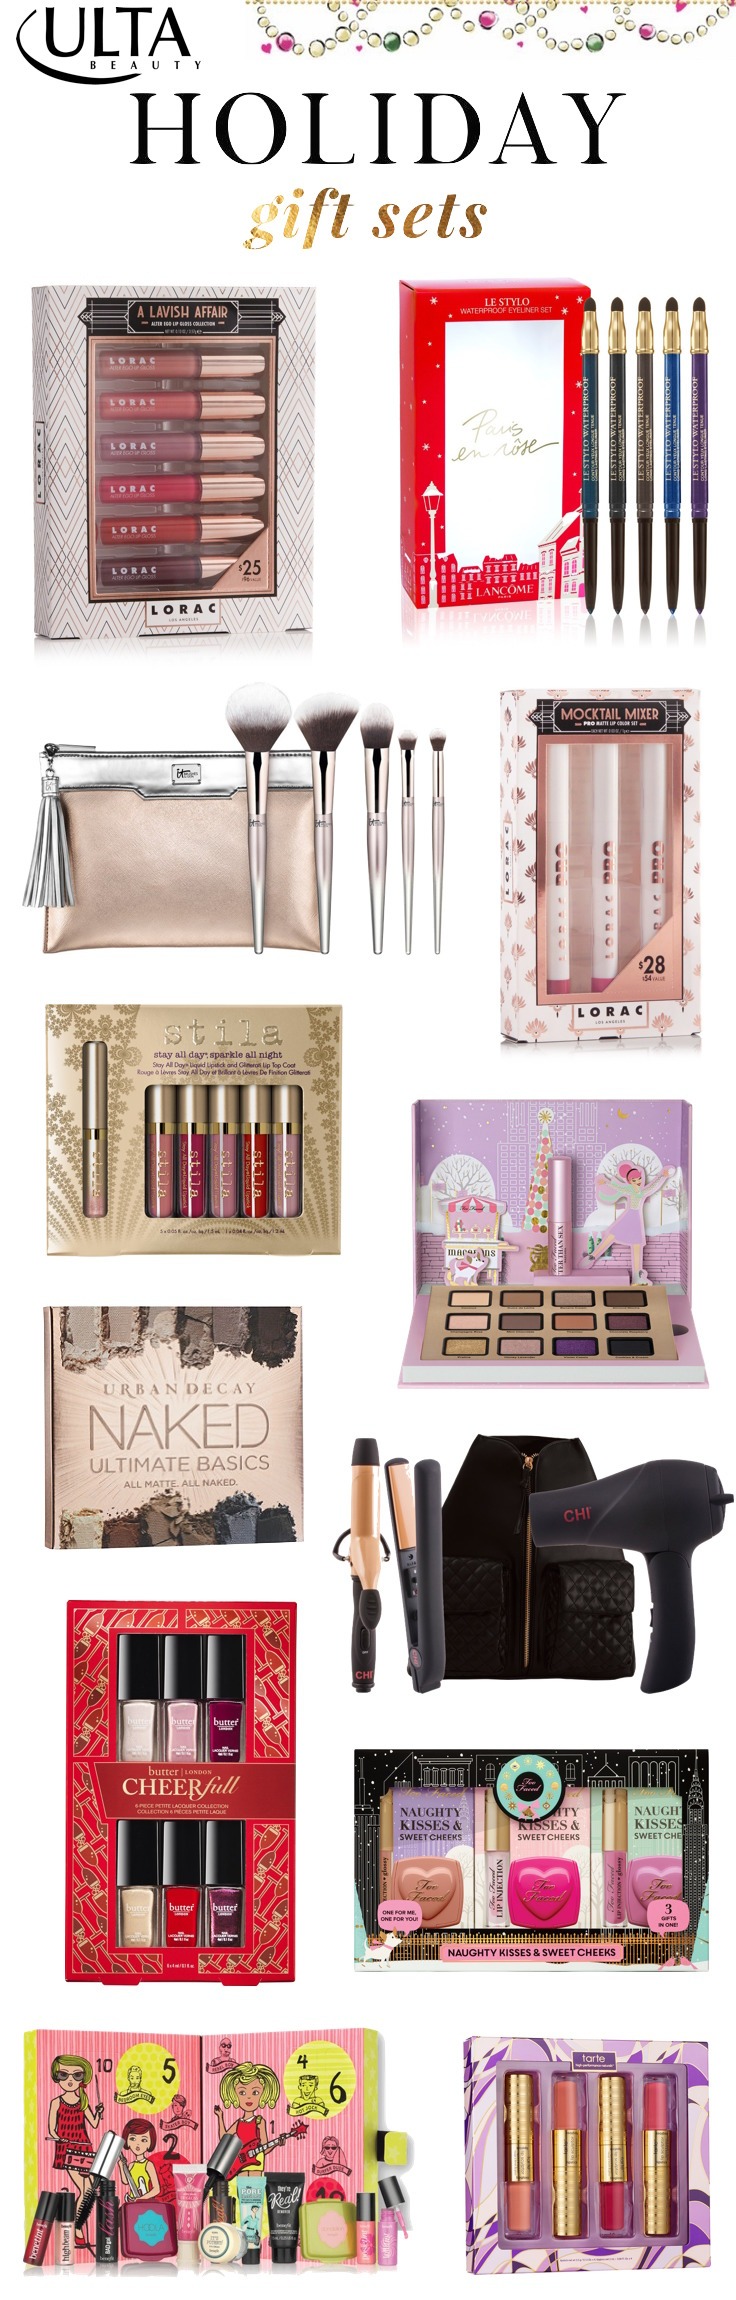 The must-have holiday 2016 gift sets at Ulta! Click through to see the full list!